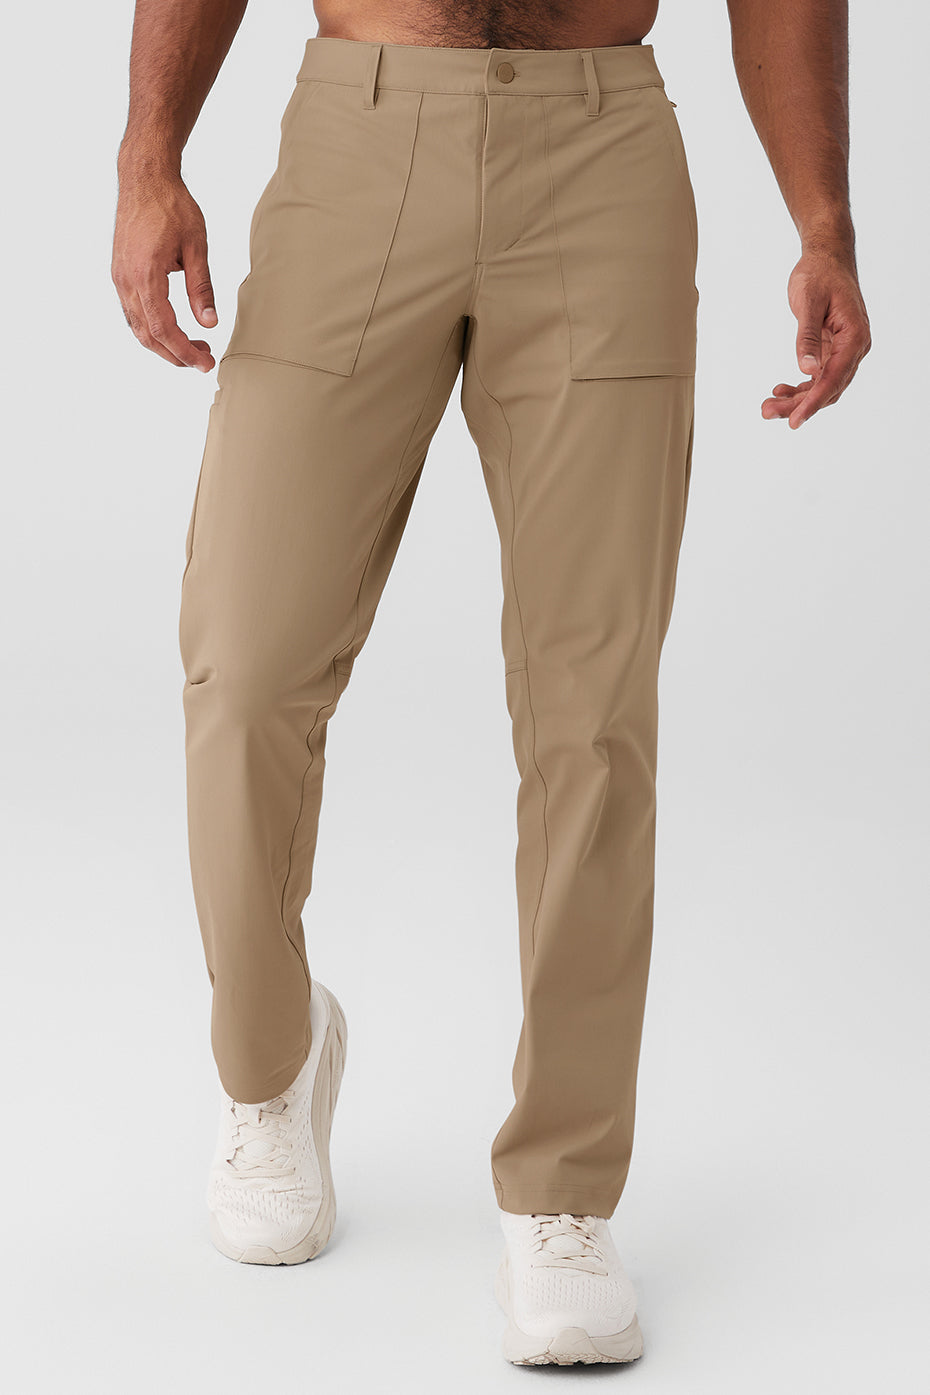 Conquer React Performance Pant - Stealth Green